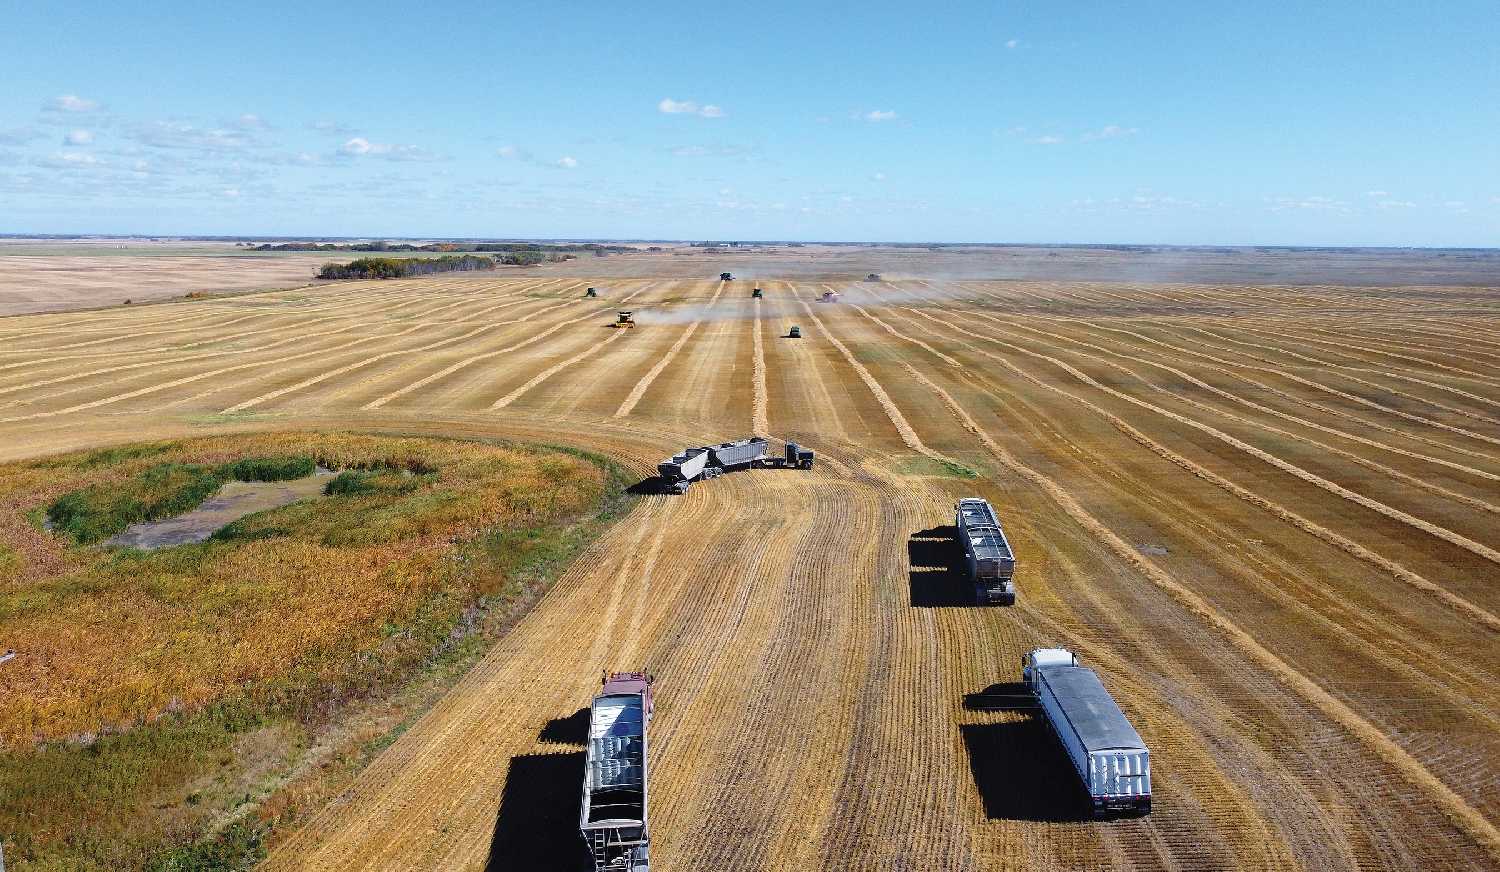 The Harvest of Hope growing project in the Moosomin area has raised more than $500,000 for the Canadian Foodgrains Bank. Local farmers volunteer their time to grow the crop, which benefits Canadian Foodgrains Bank projects around the world. This is a scene from the 2021 Harvest of Hope